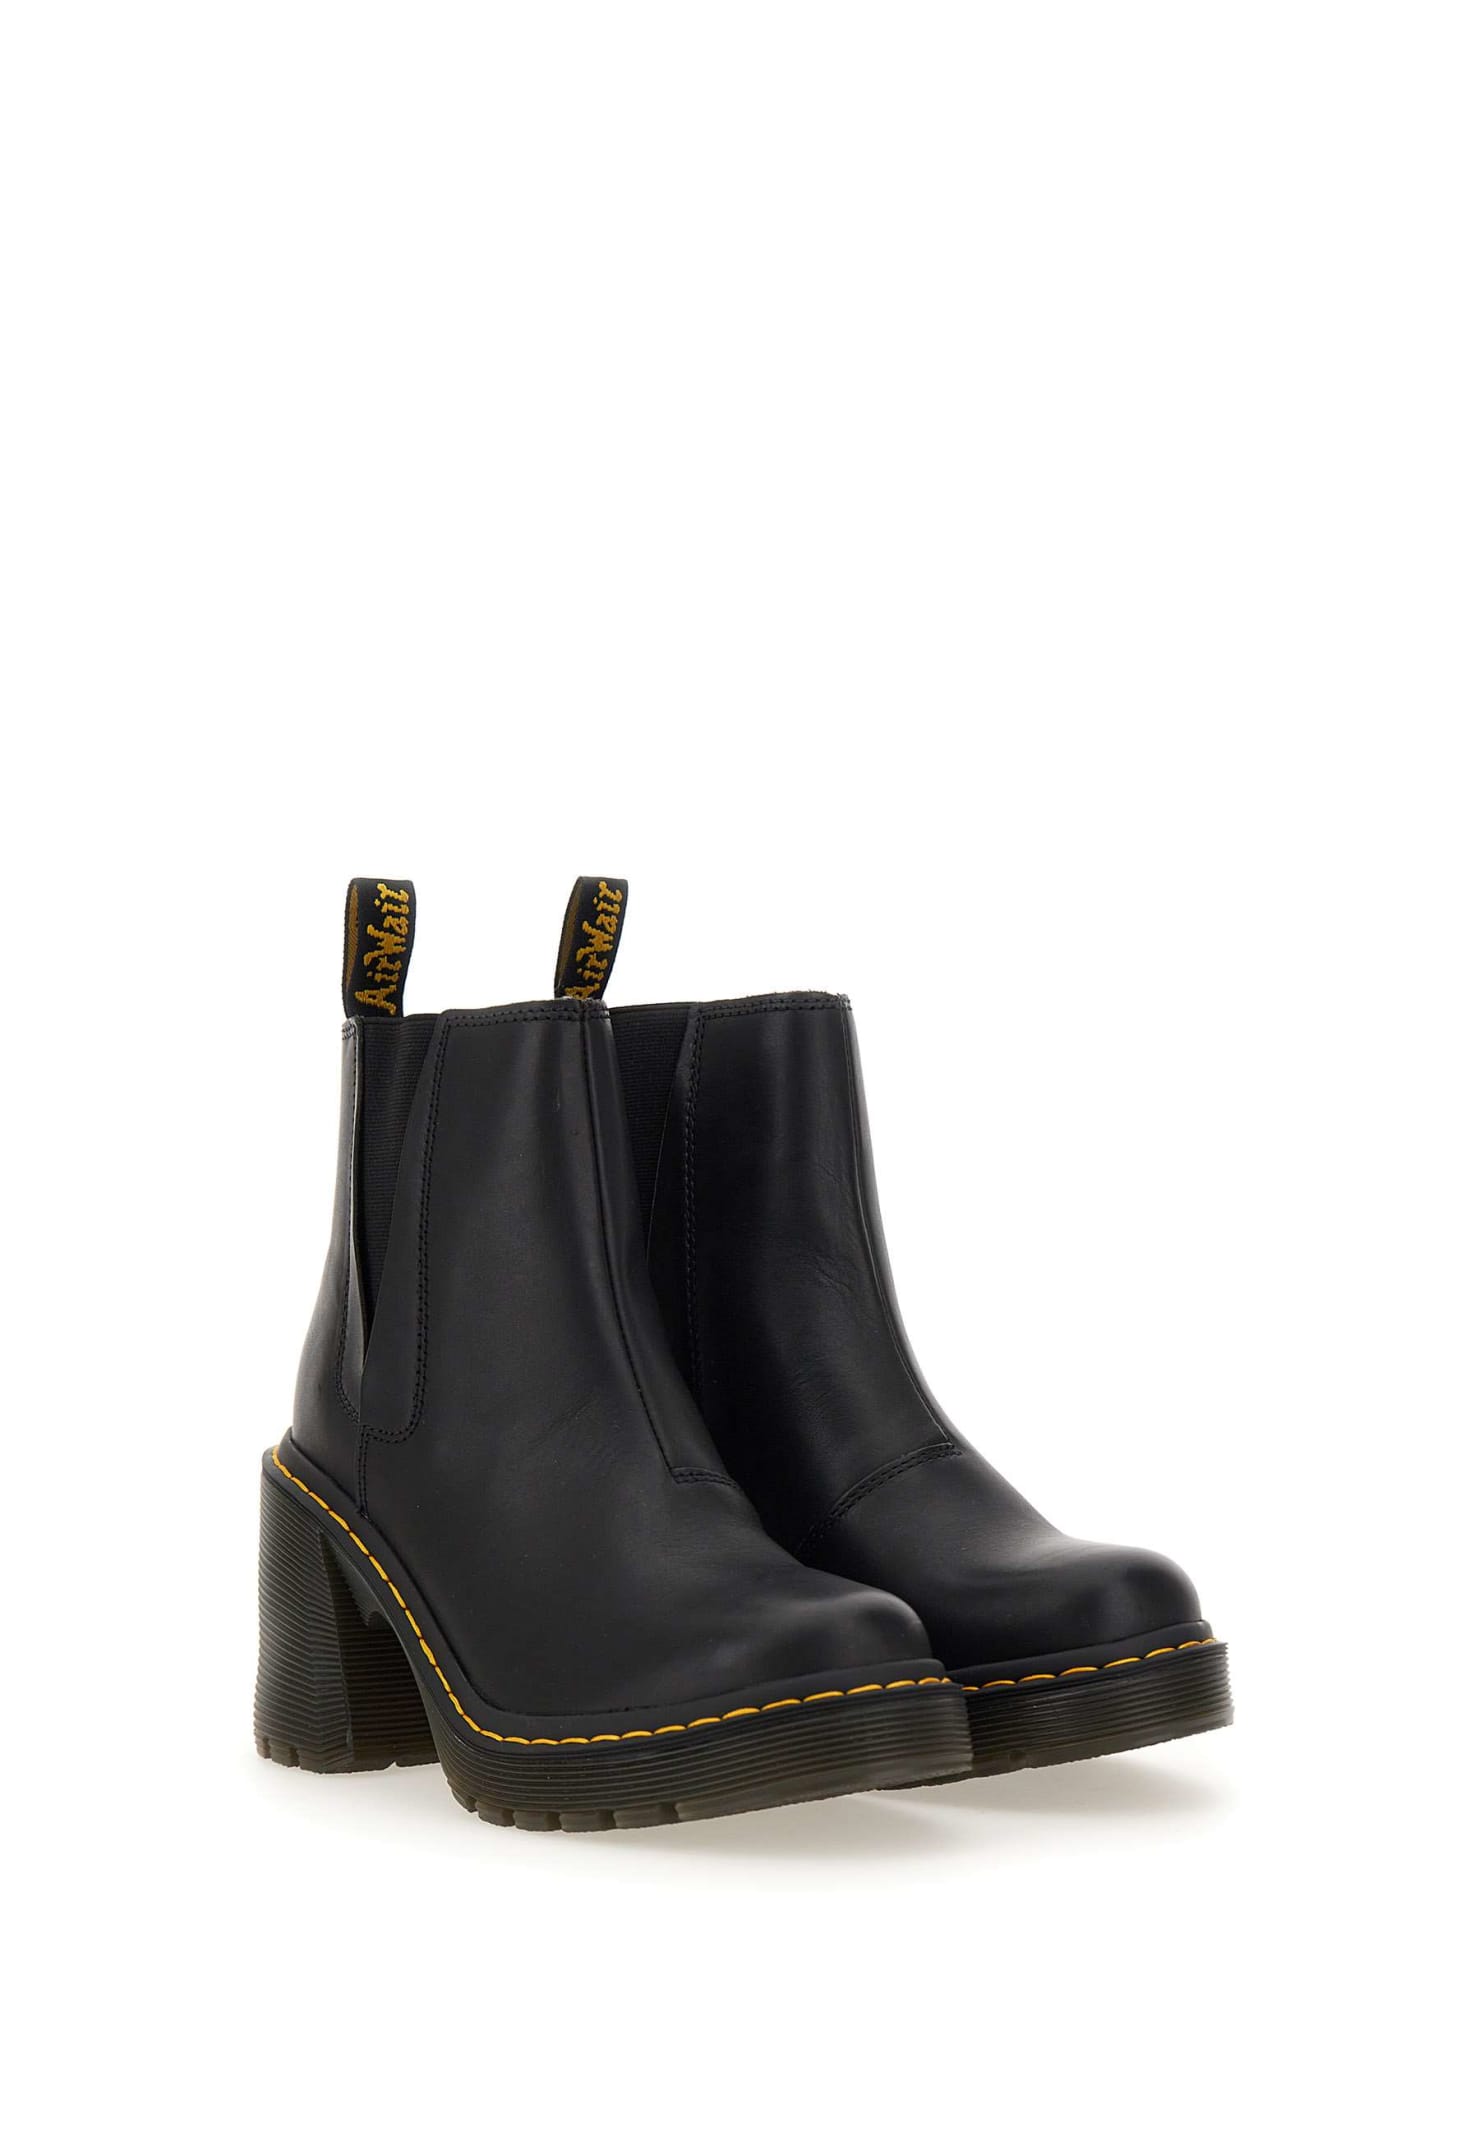 Shop Dr. Martens' Spence Leather Ankle Boots